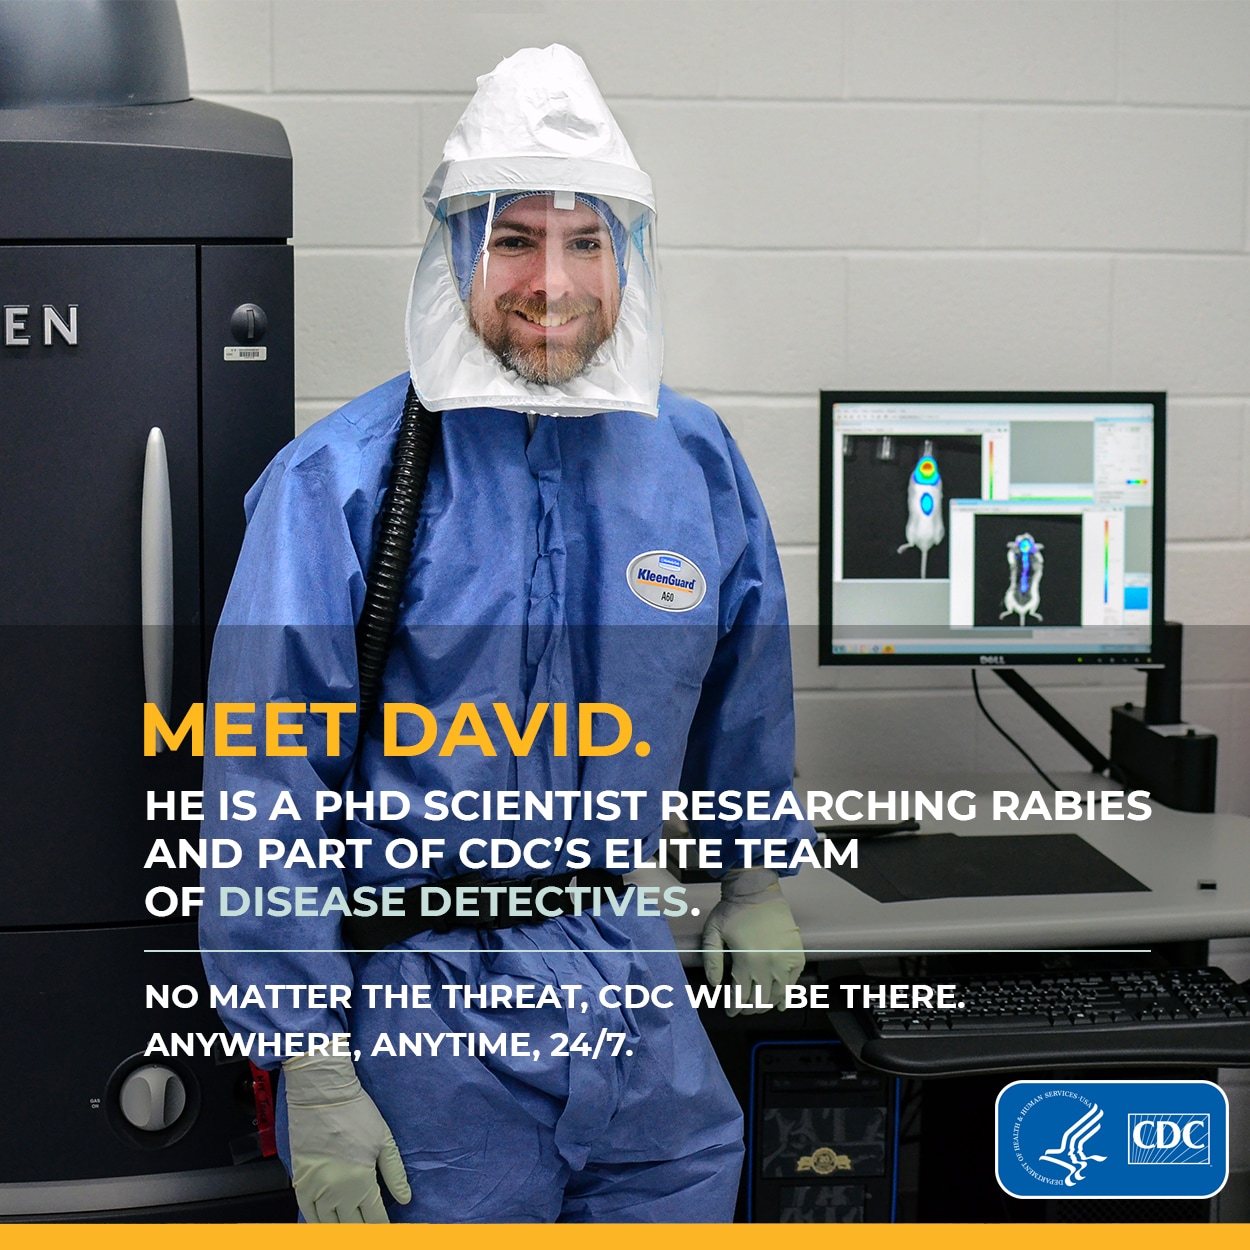 Meet David. He is a PHD Scientist Researching Rabies and Part of CDC's Elite Team of Disease Detectives: No matter the threat, CDC Will be There. Anywhere, anytime, 24/7